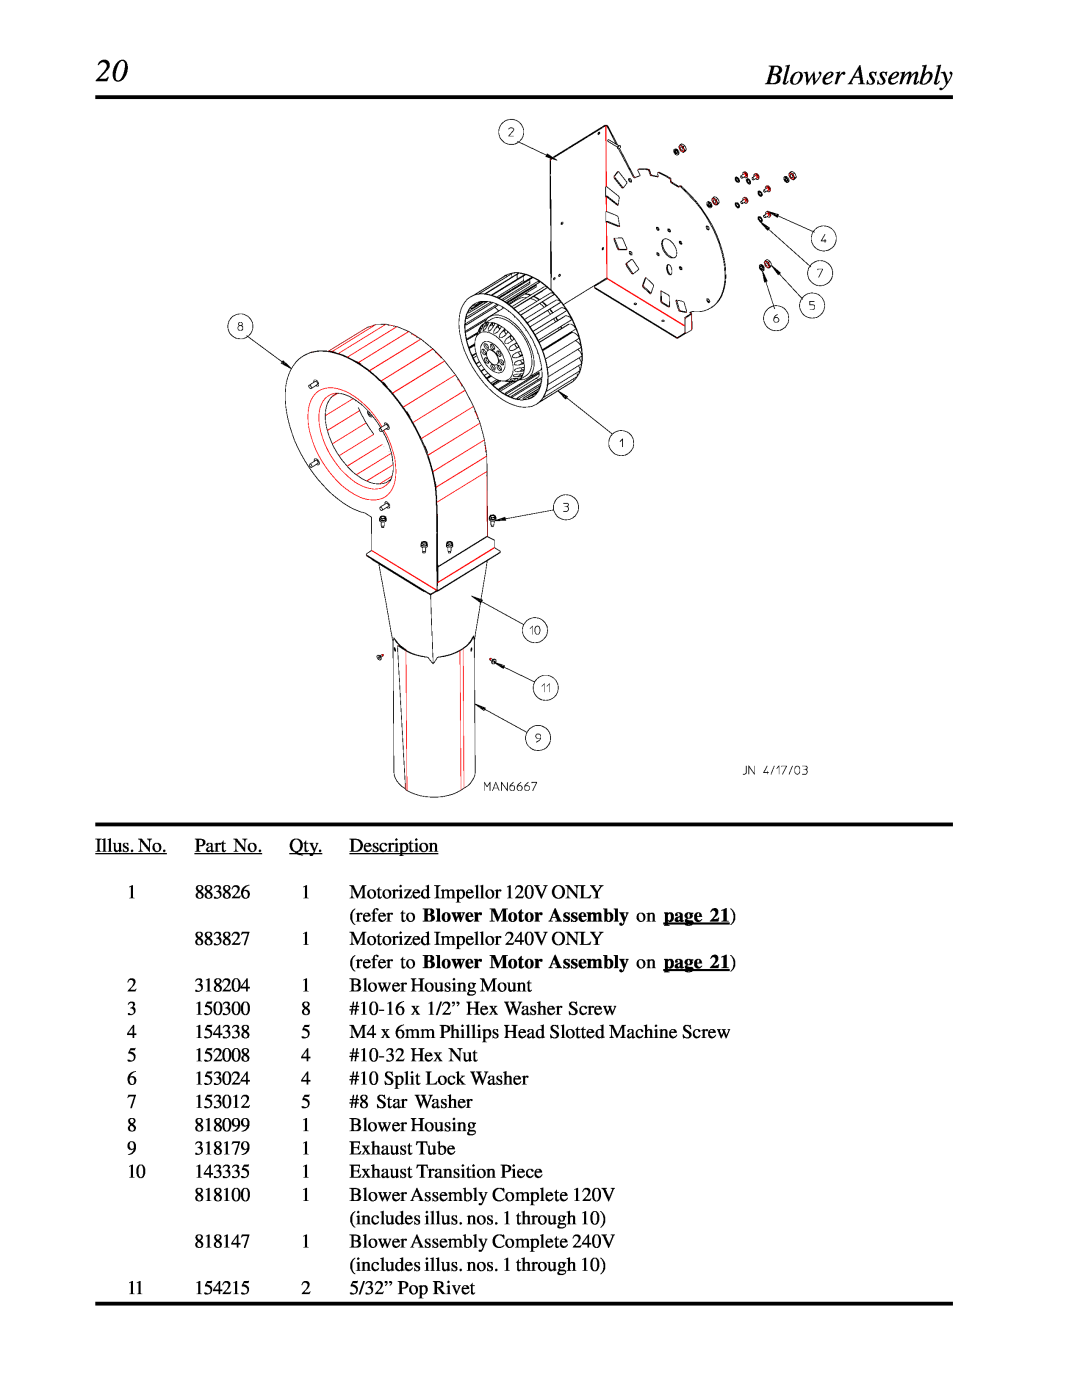 American Dryer Corp CG20, SL20 manual Blower Assembly, refer to Blower Motor Assembly on page 